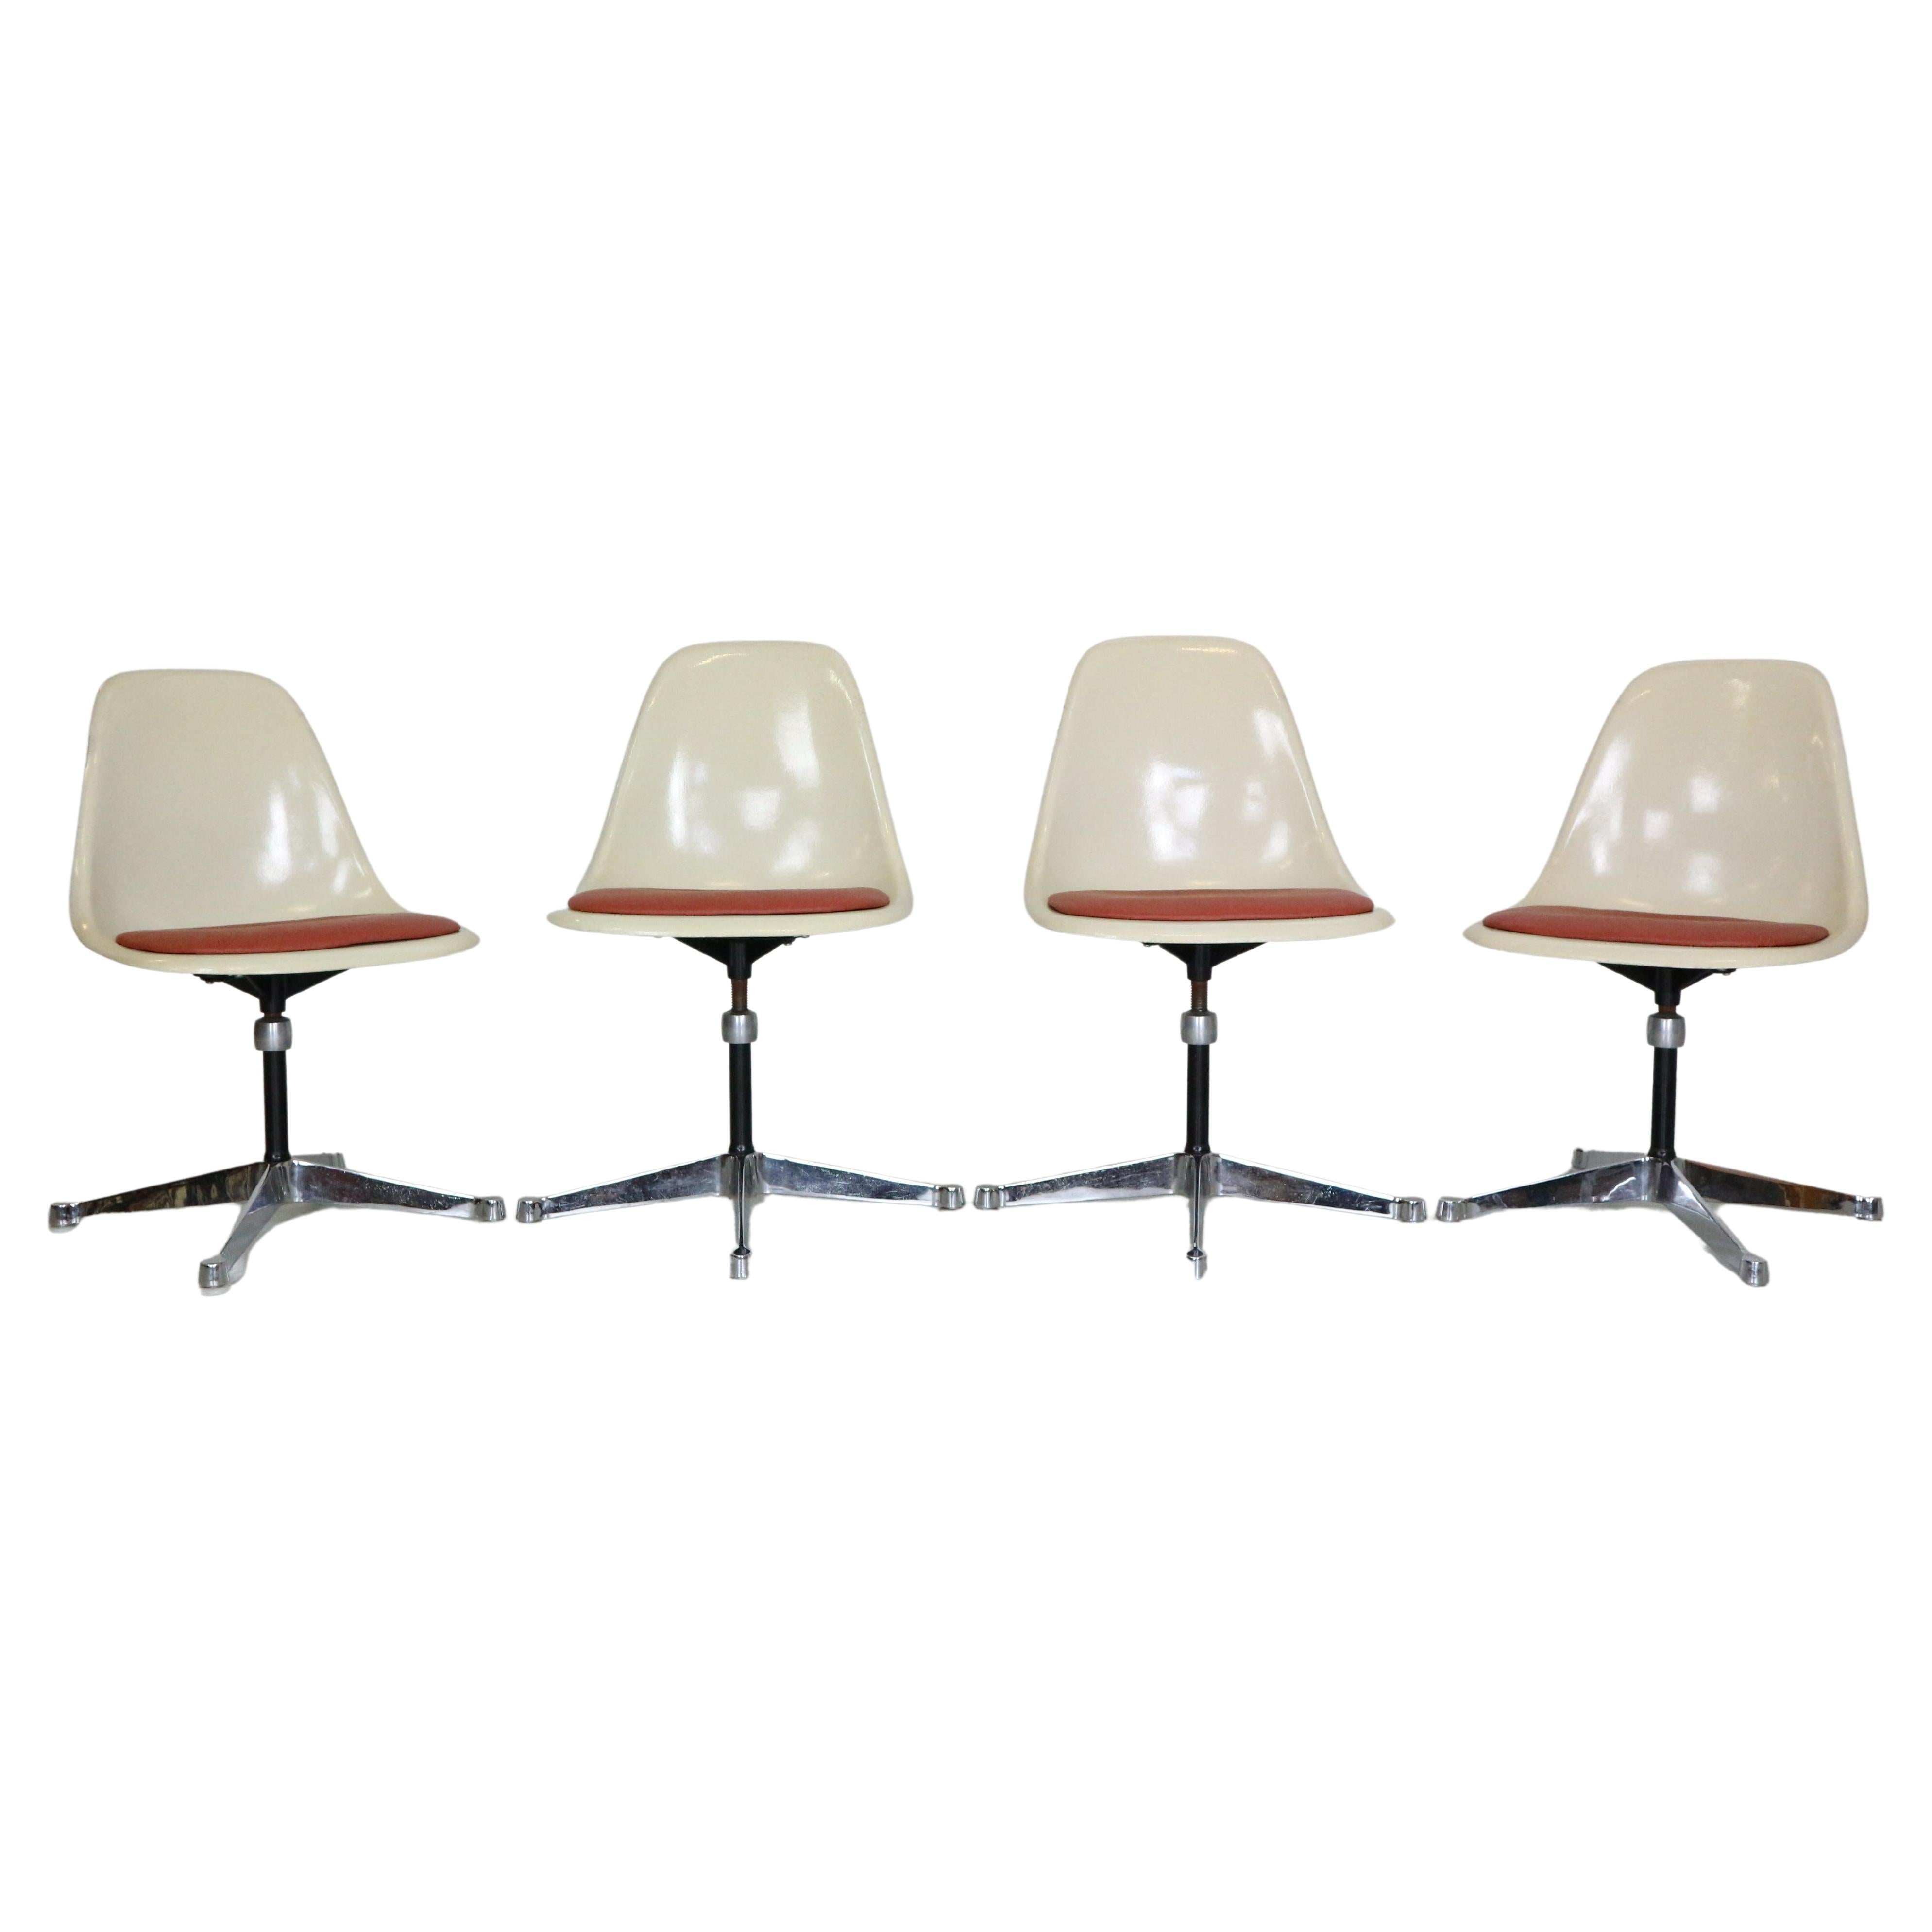 Charles & Ray Eames Set Of 4 Contract Base Chairs For Herman Miller, 1960